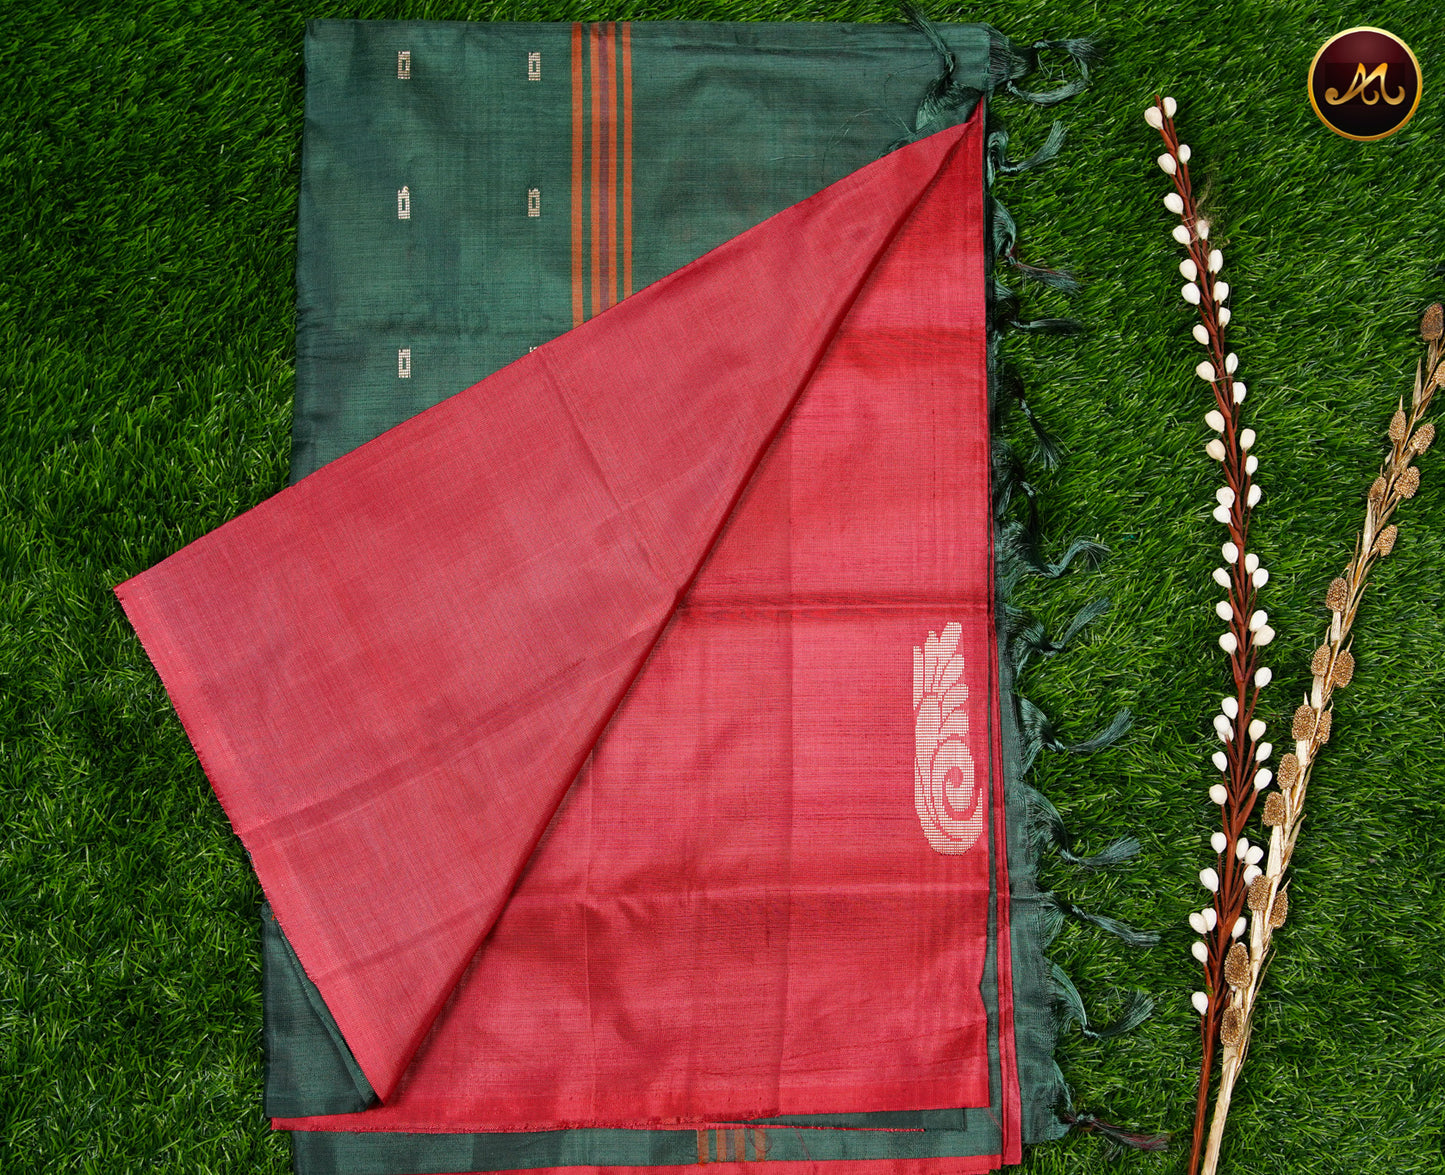 Banana Pith Saree in Maroon and Bottle Green combination with Thread Butta